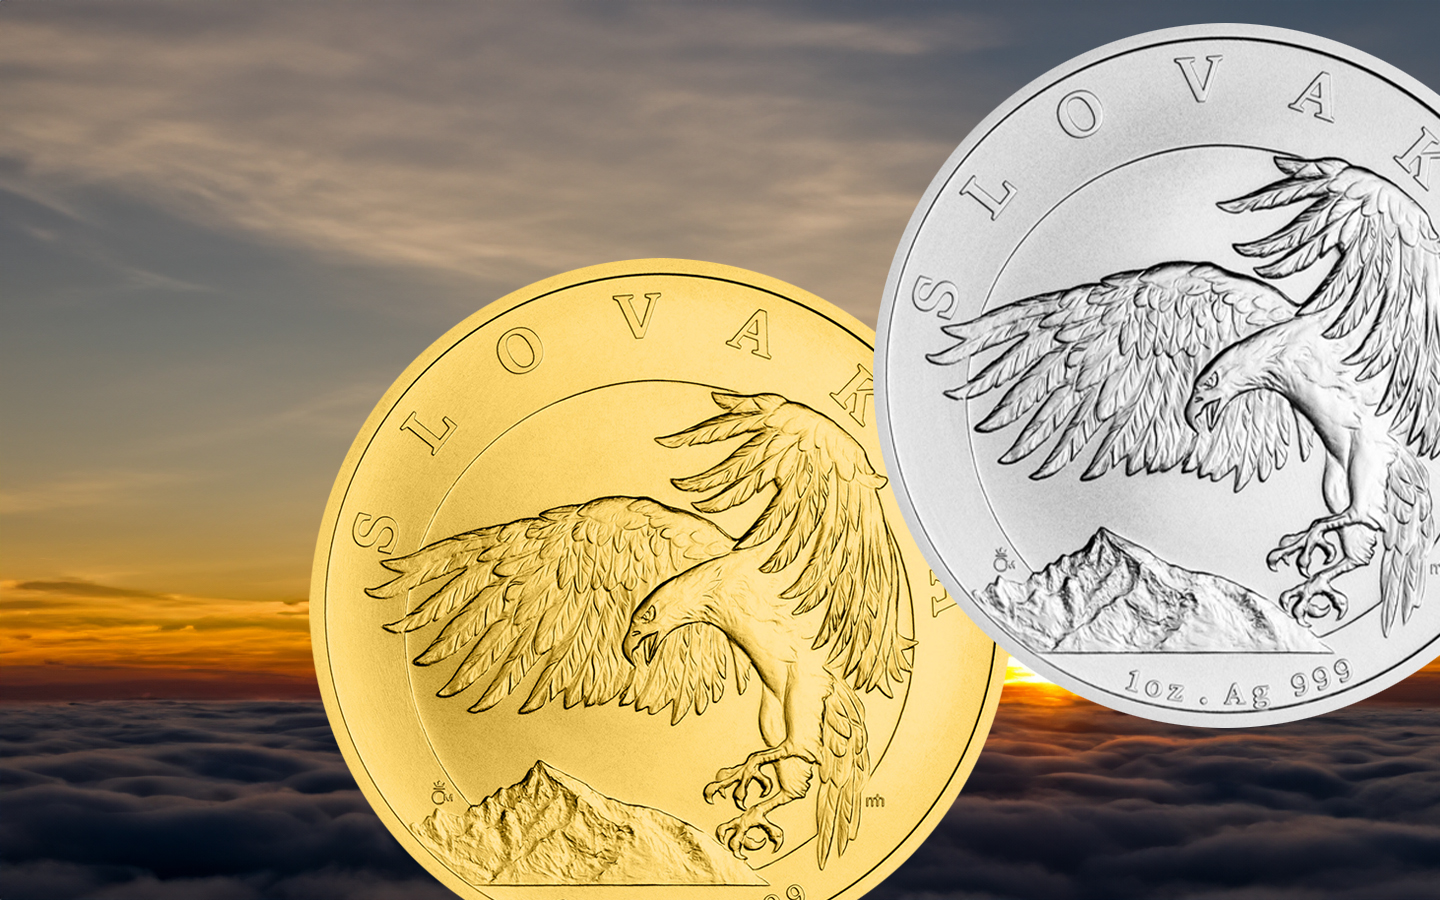 Slovak Eagle Coins Swoop In